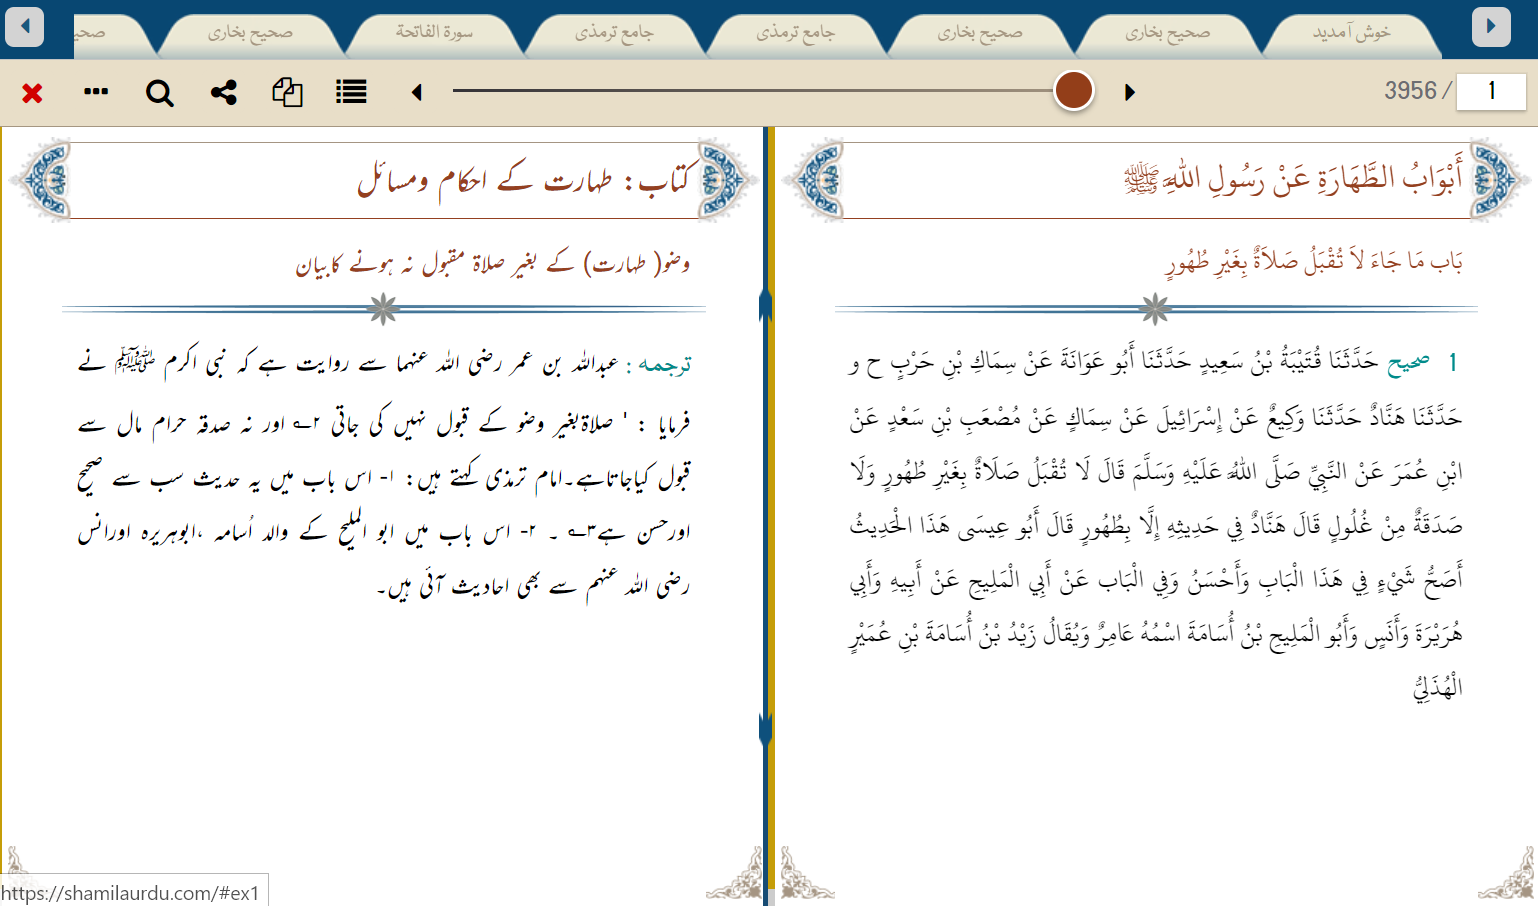 Hadith research site